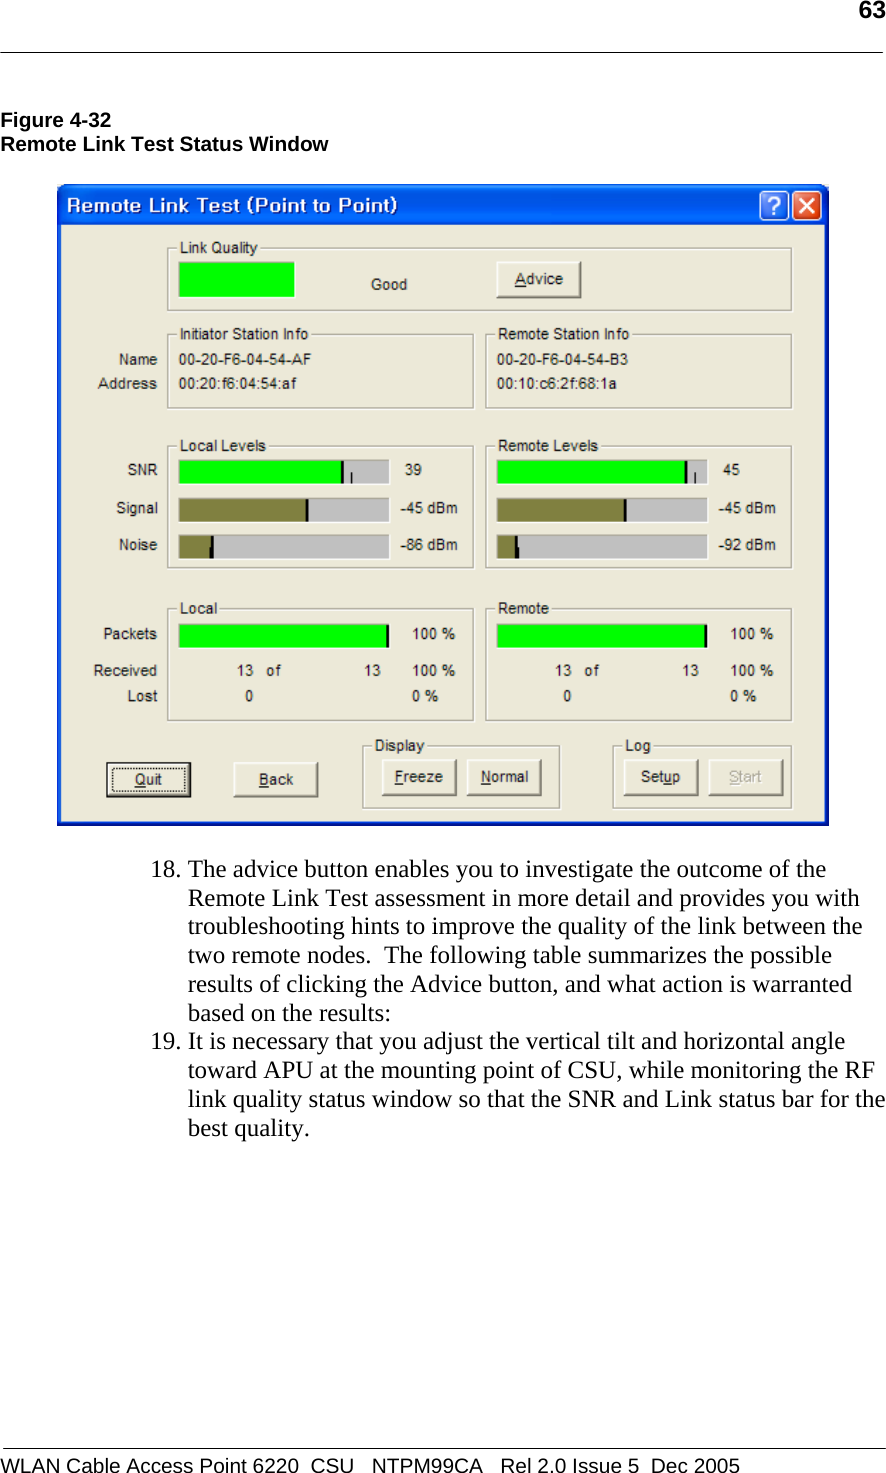   63  WLAN Cable Access Point 6220  CSU   NTPM99CA   Rel 2.0 Issue 5  Dec 2005 Figure 4-32 Remote Link Test Status Window    18. The advice button enables you to investigate the outcome of the Remote Link Test assessment in more detail and provides you with troubleshooting hints to improve the quality of the link between the two remote nodes.  The following table summarizes the possible results of clicking the Advice button, and what action is warranted based on the results: 19. It is necessary that you adjust the vertical tilt and horizontal angle toward APU at the mounting point of CSU, while monitoring the RF link quality status window so that the SNR and Link status bar for the best quality.  